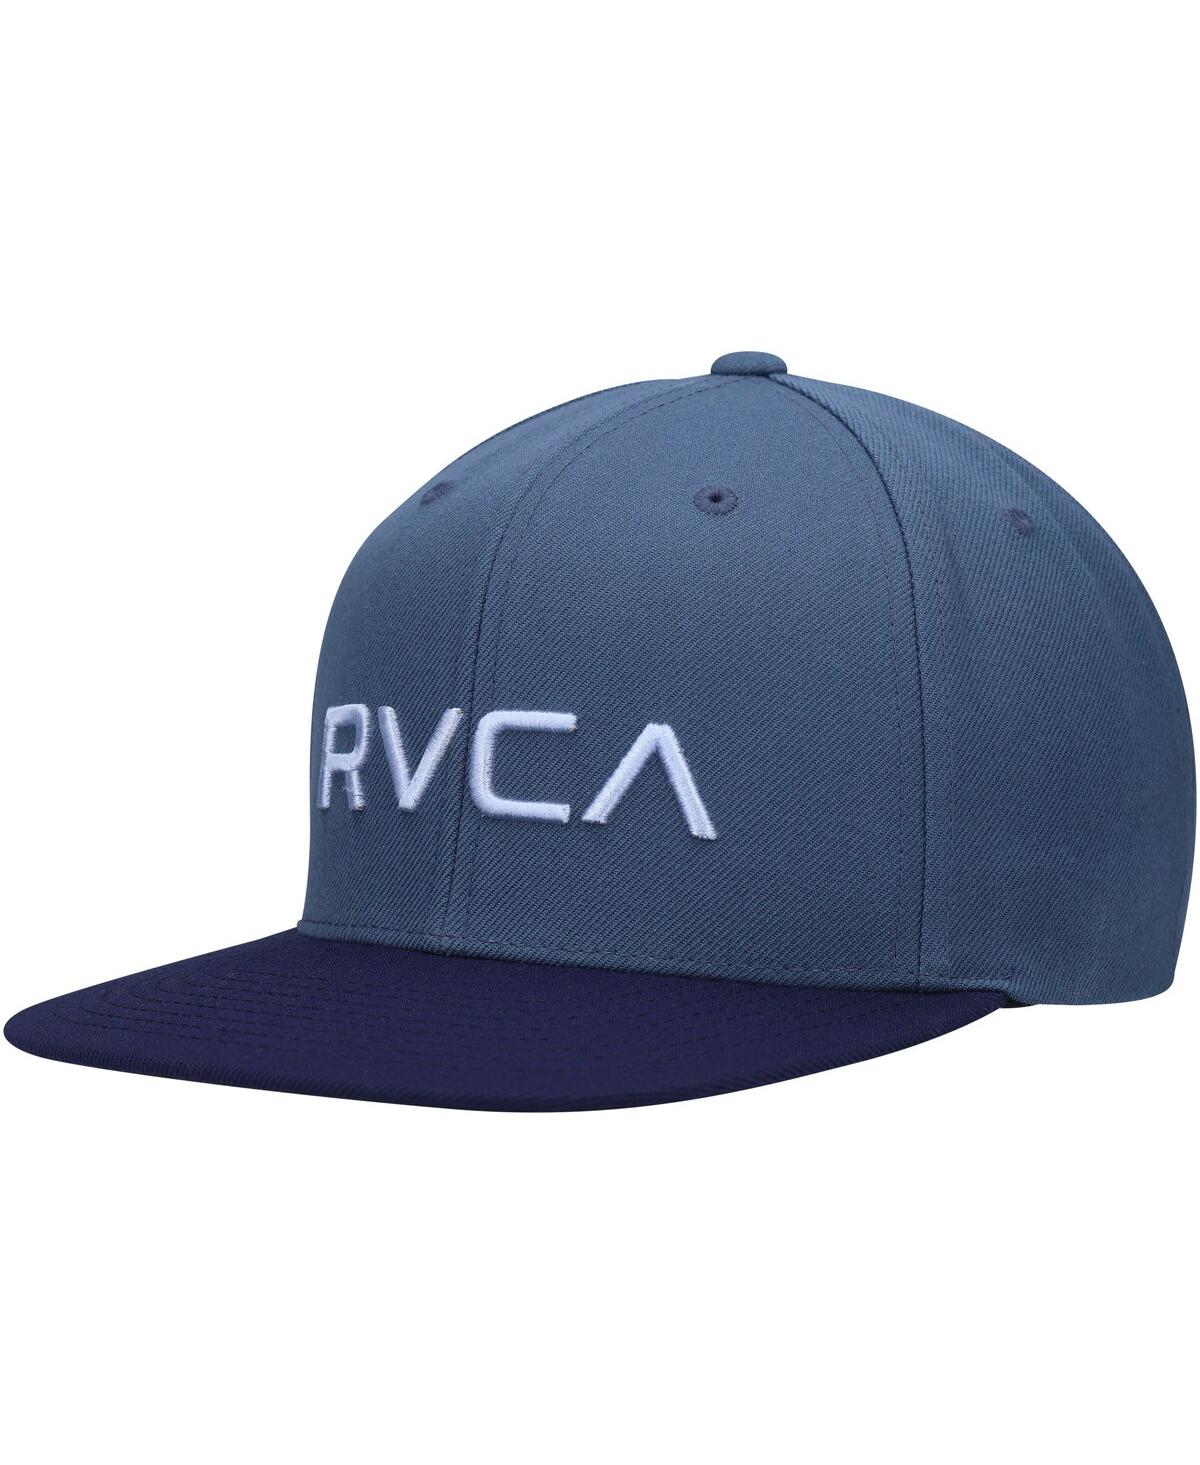 Rvca Men's  Blue And Navy Twill Ii Snapback Hat In Blue,navy